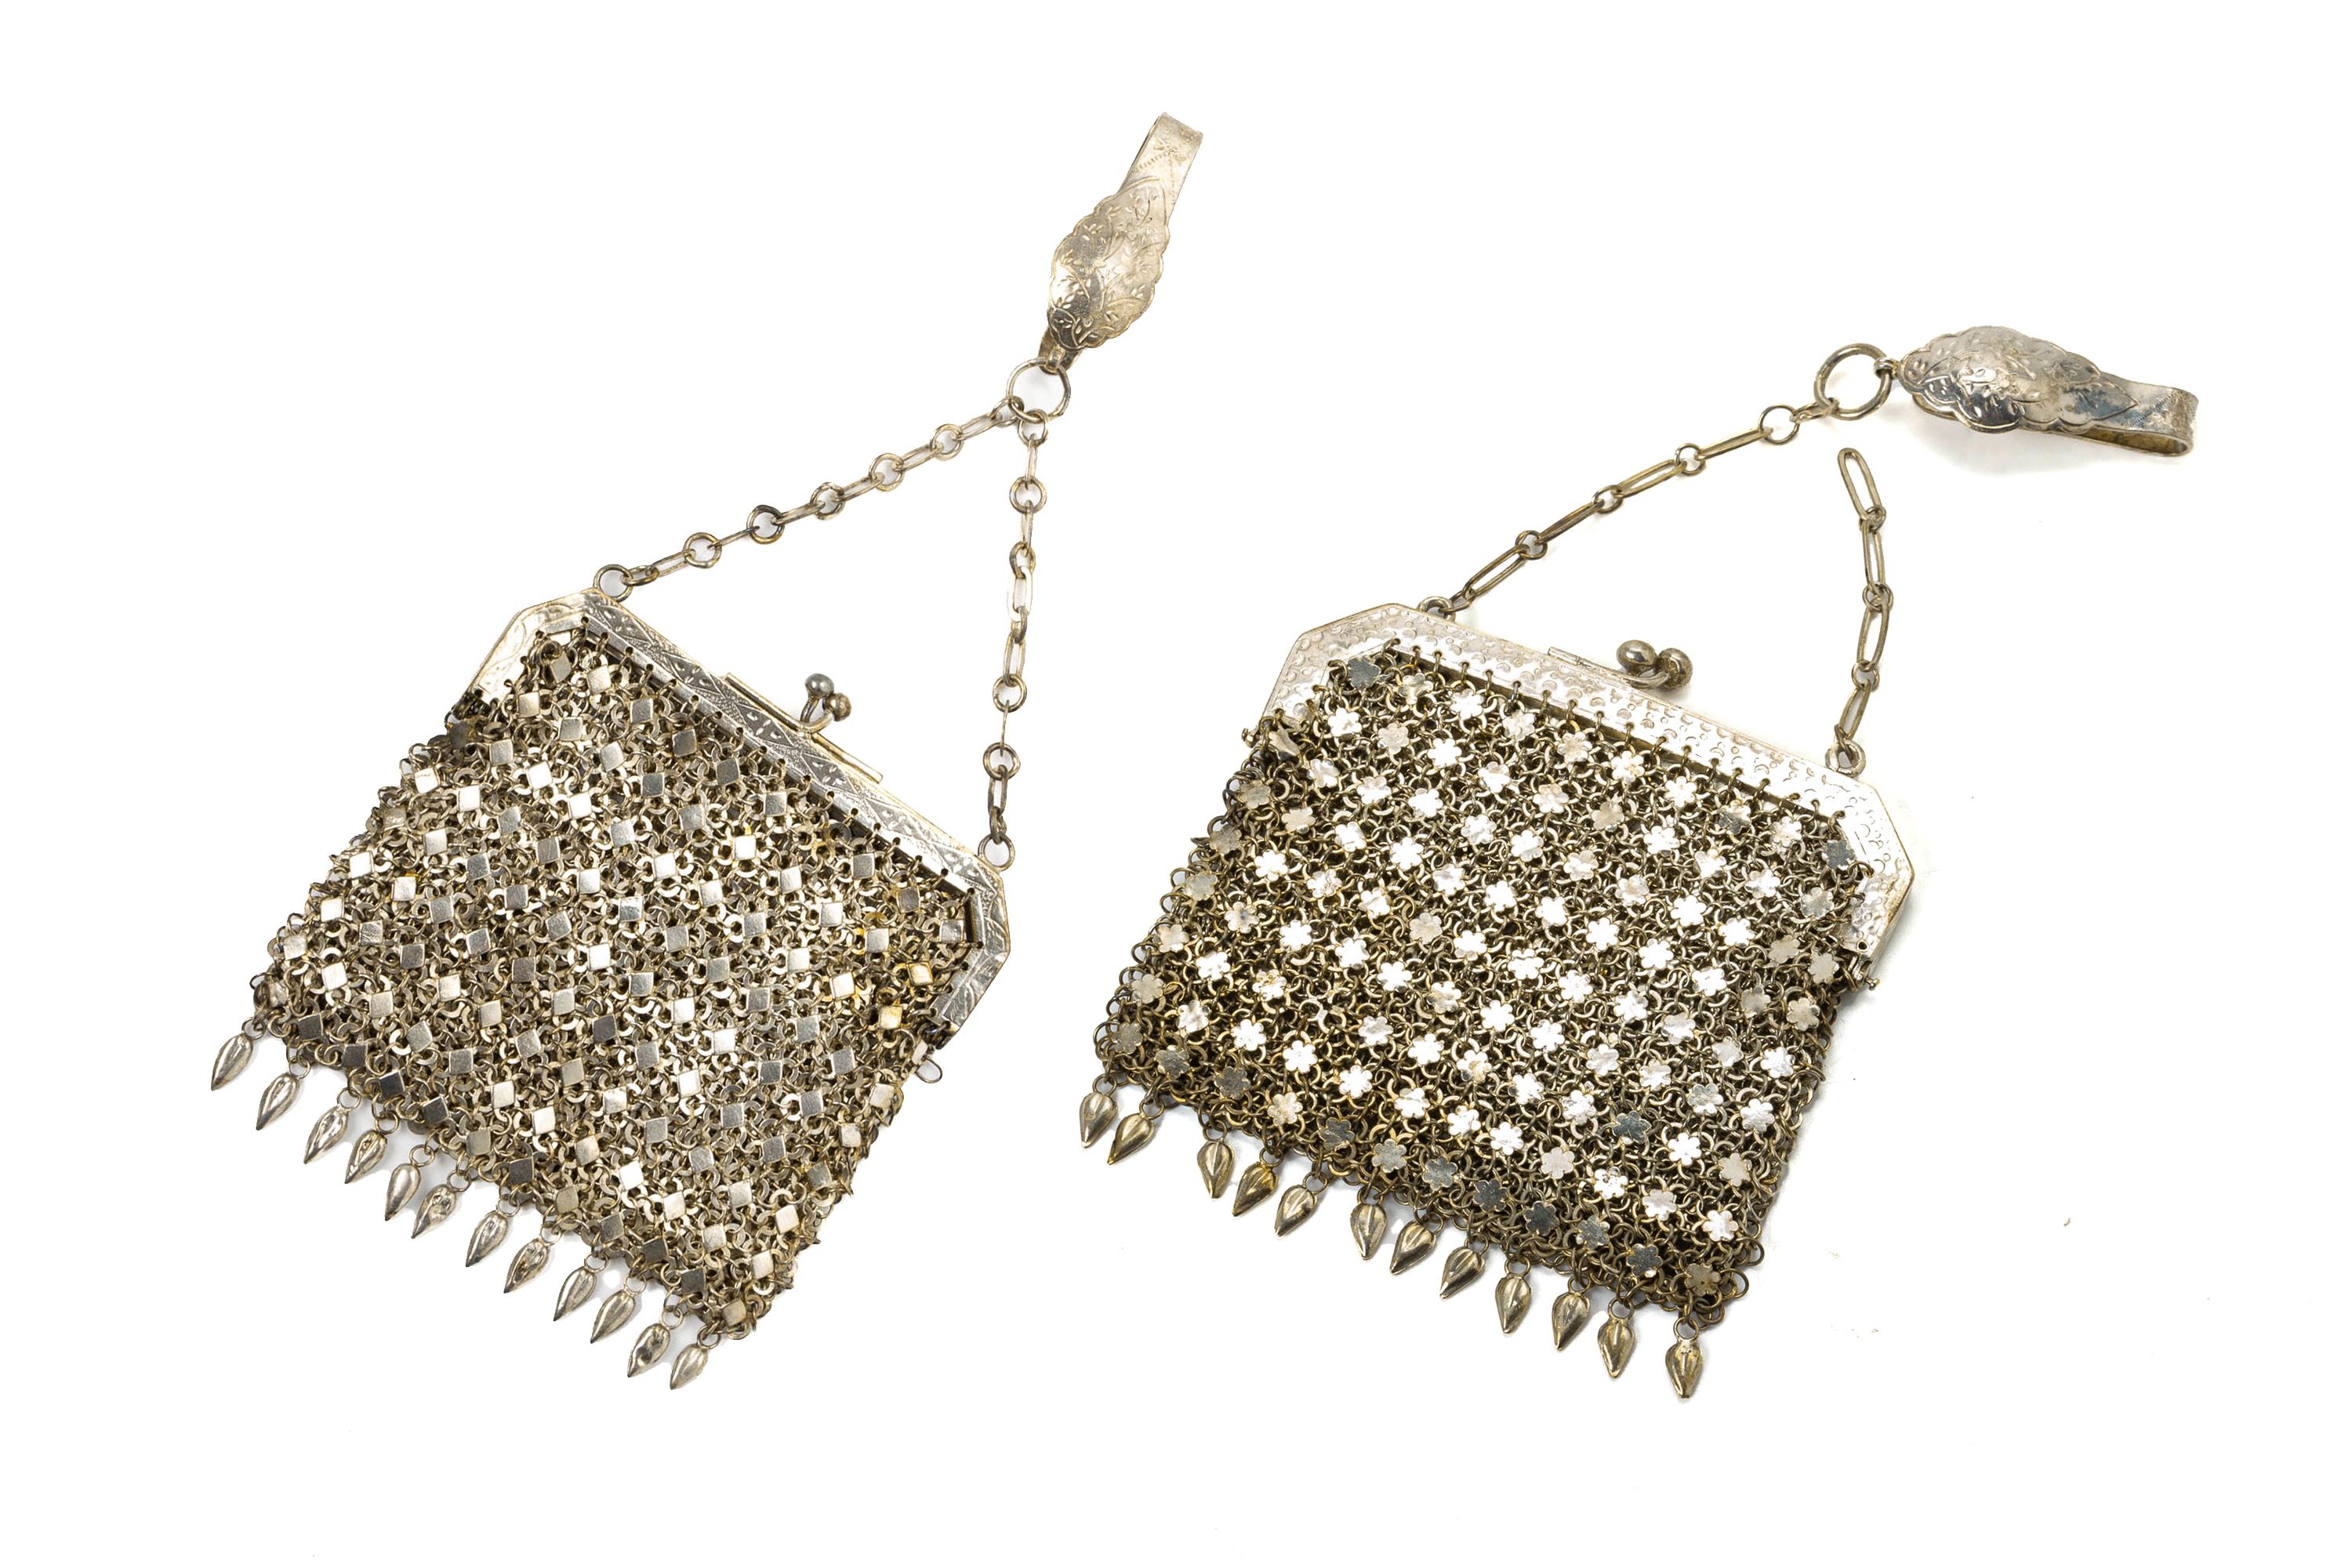 TWO WHITE METAL MESH PURSES WITH CHATELAINE CLIPS